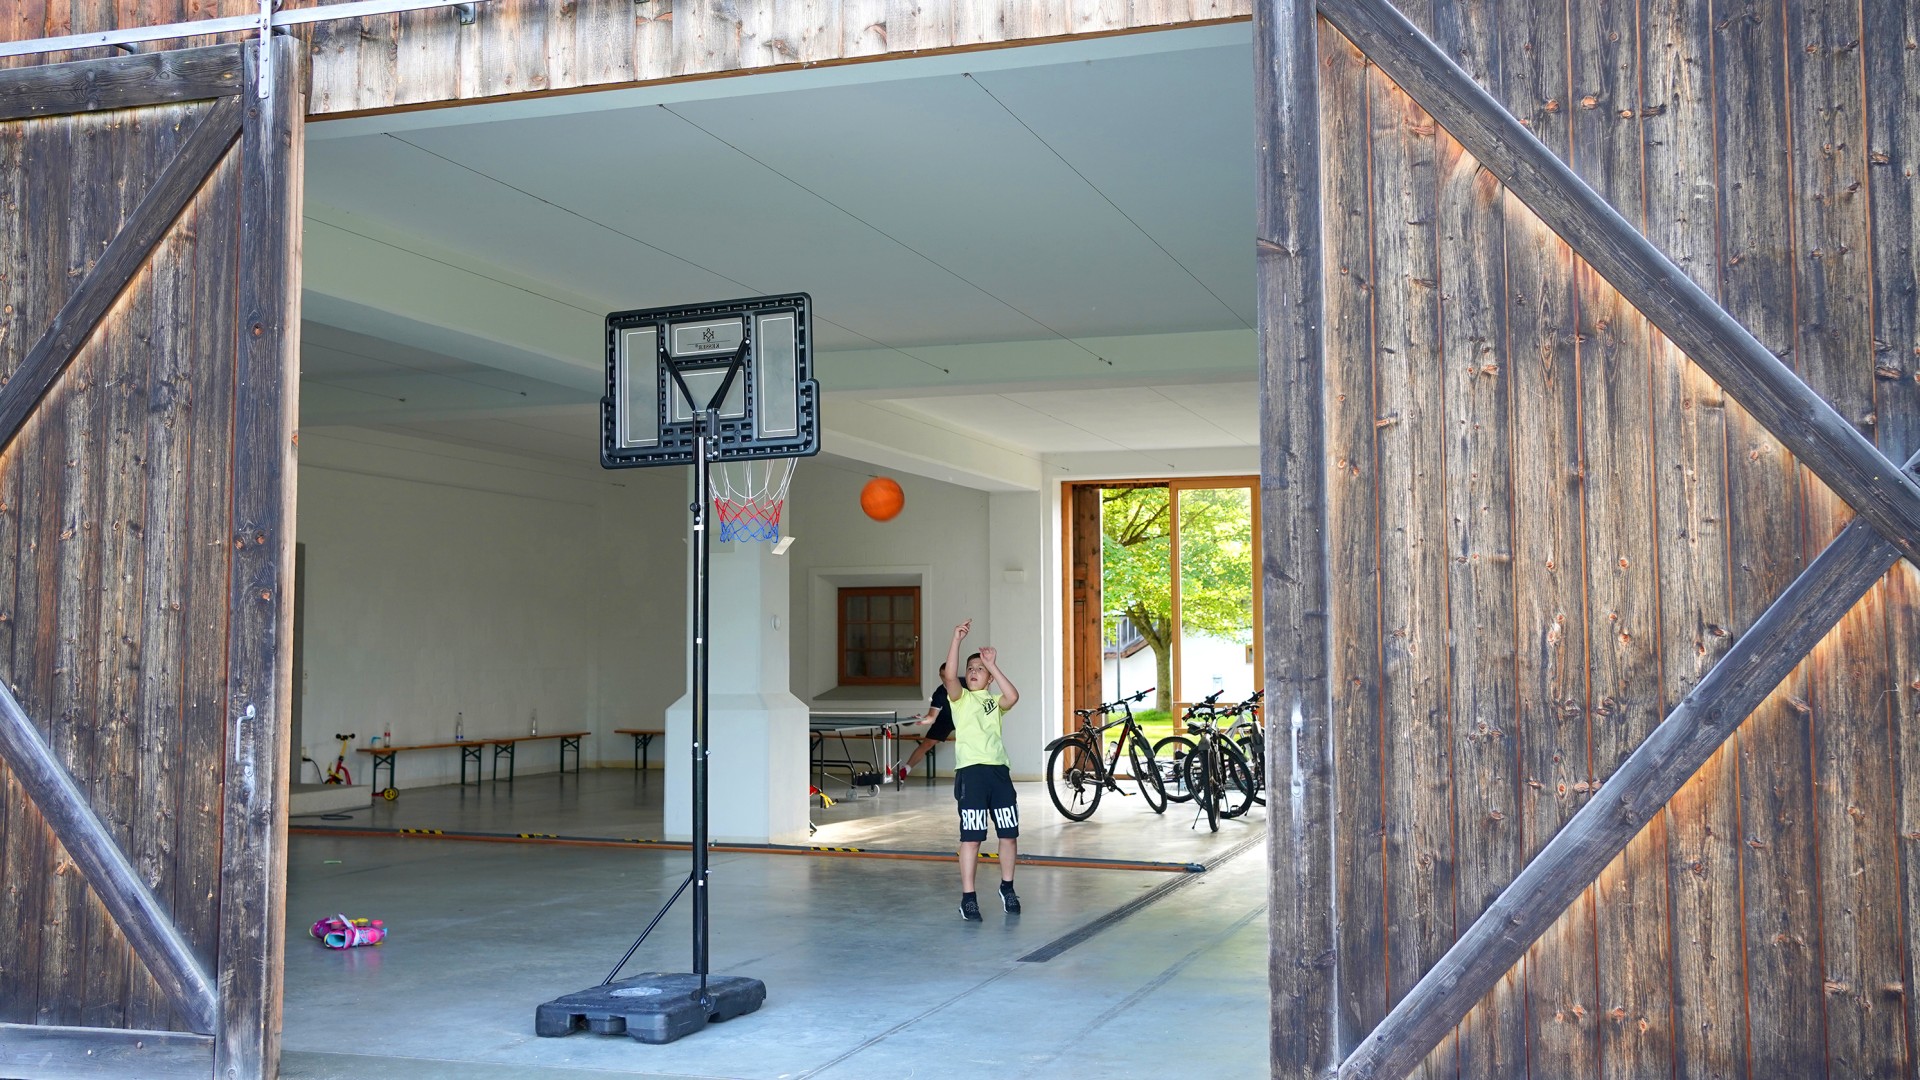 A boy throws at a basketball hoop in a converted barn on the Eck farm estate.